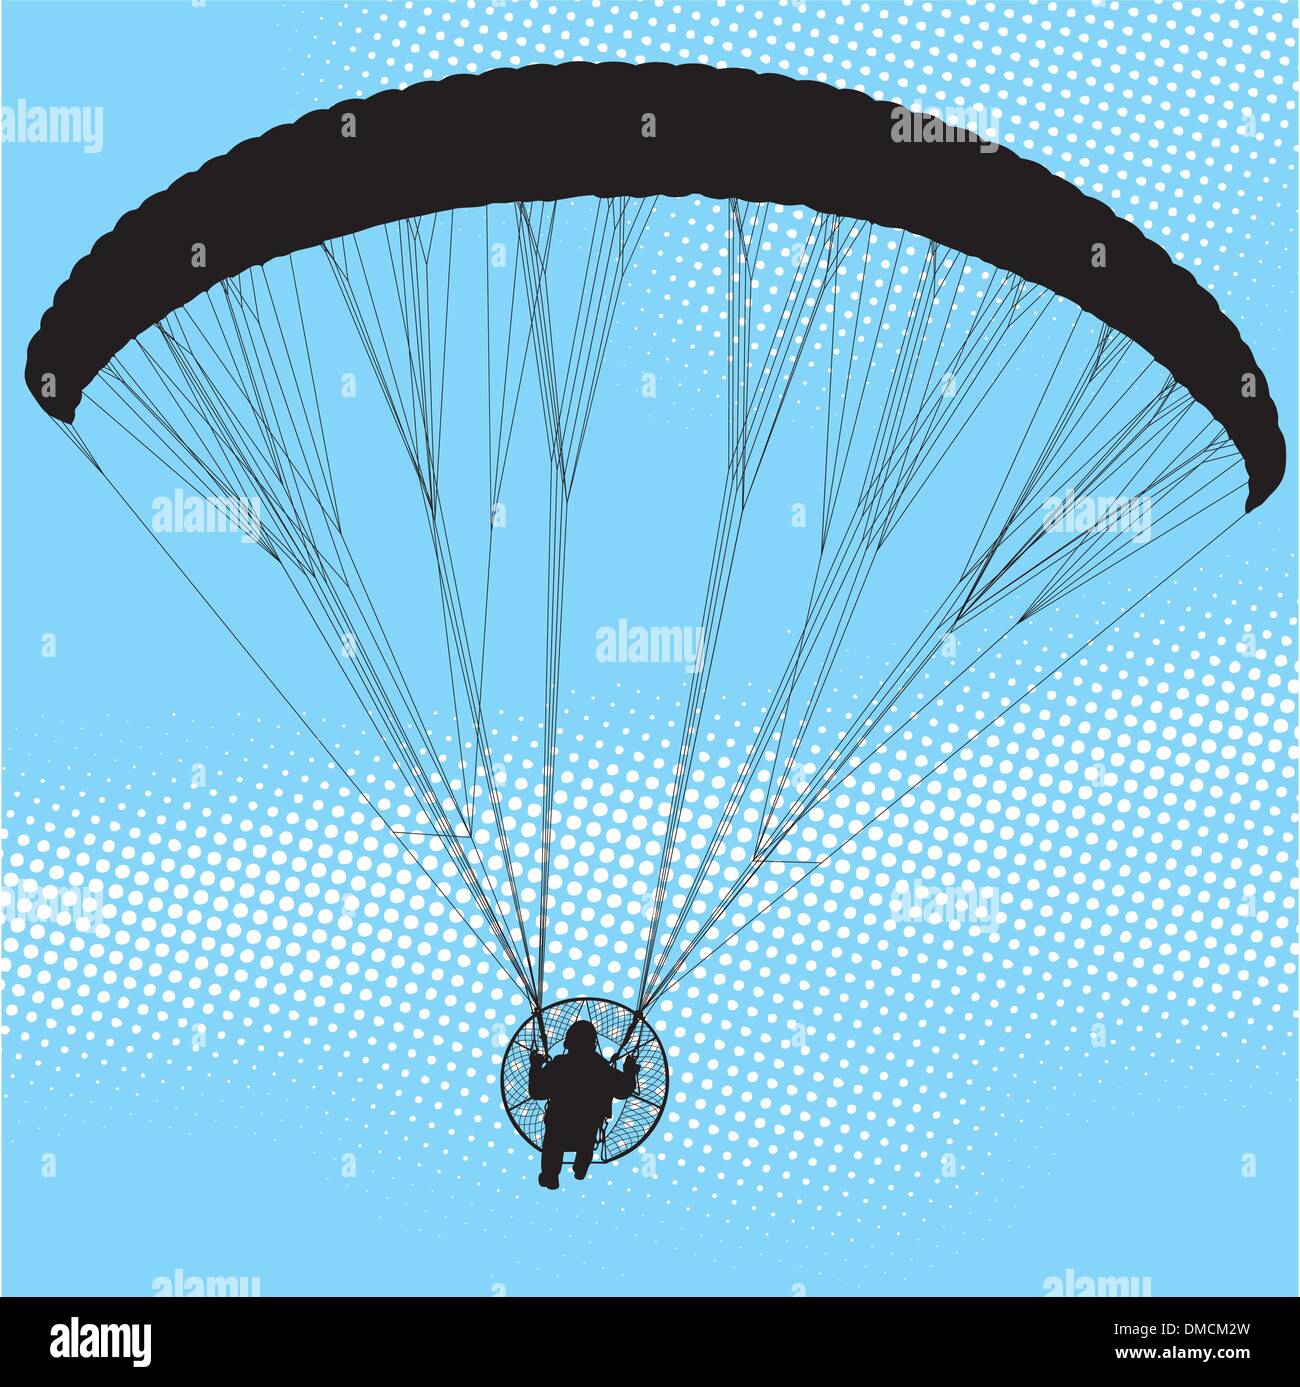 Powered skydiving Stock Vector Images - Alamy